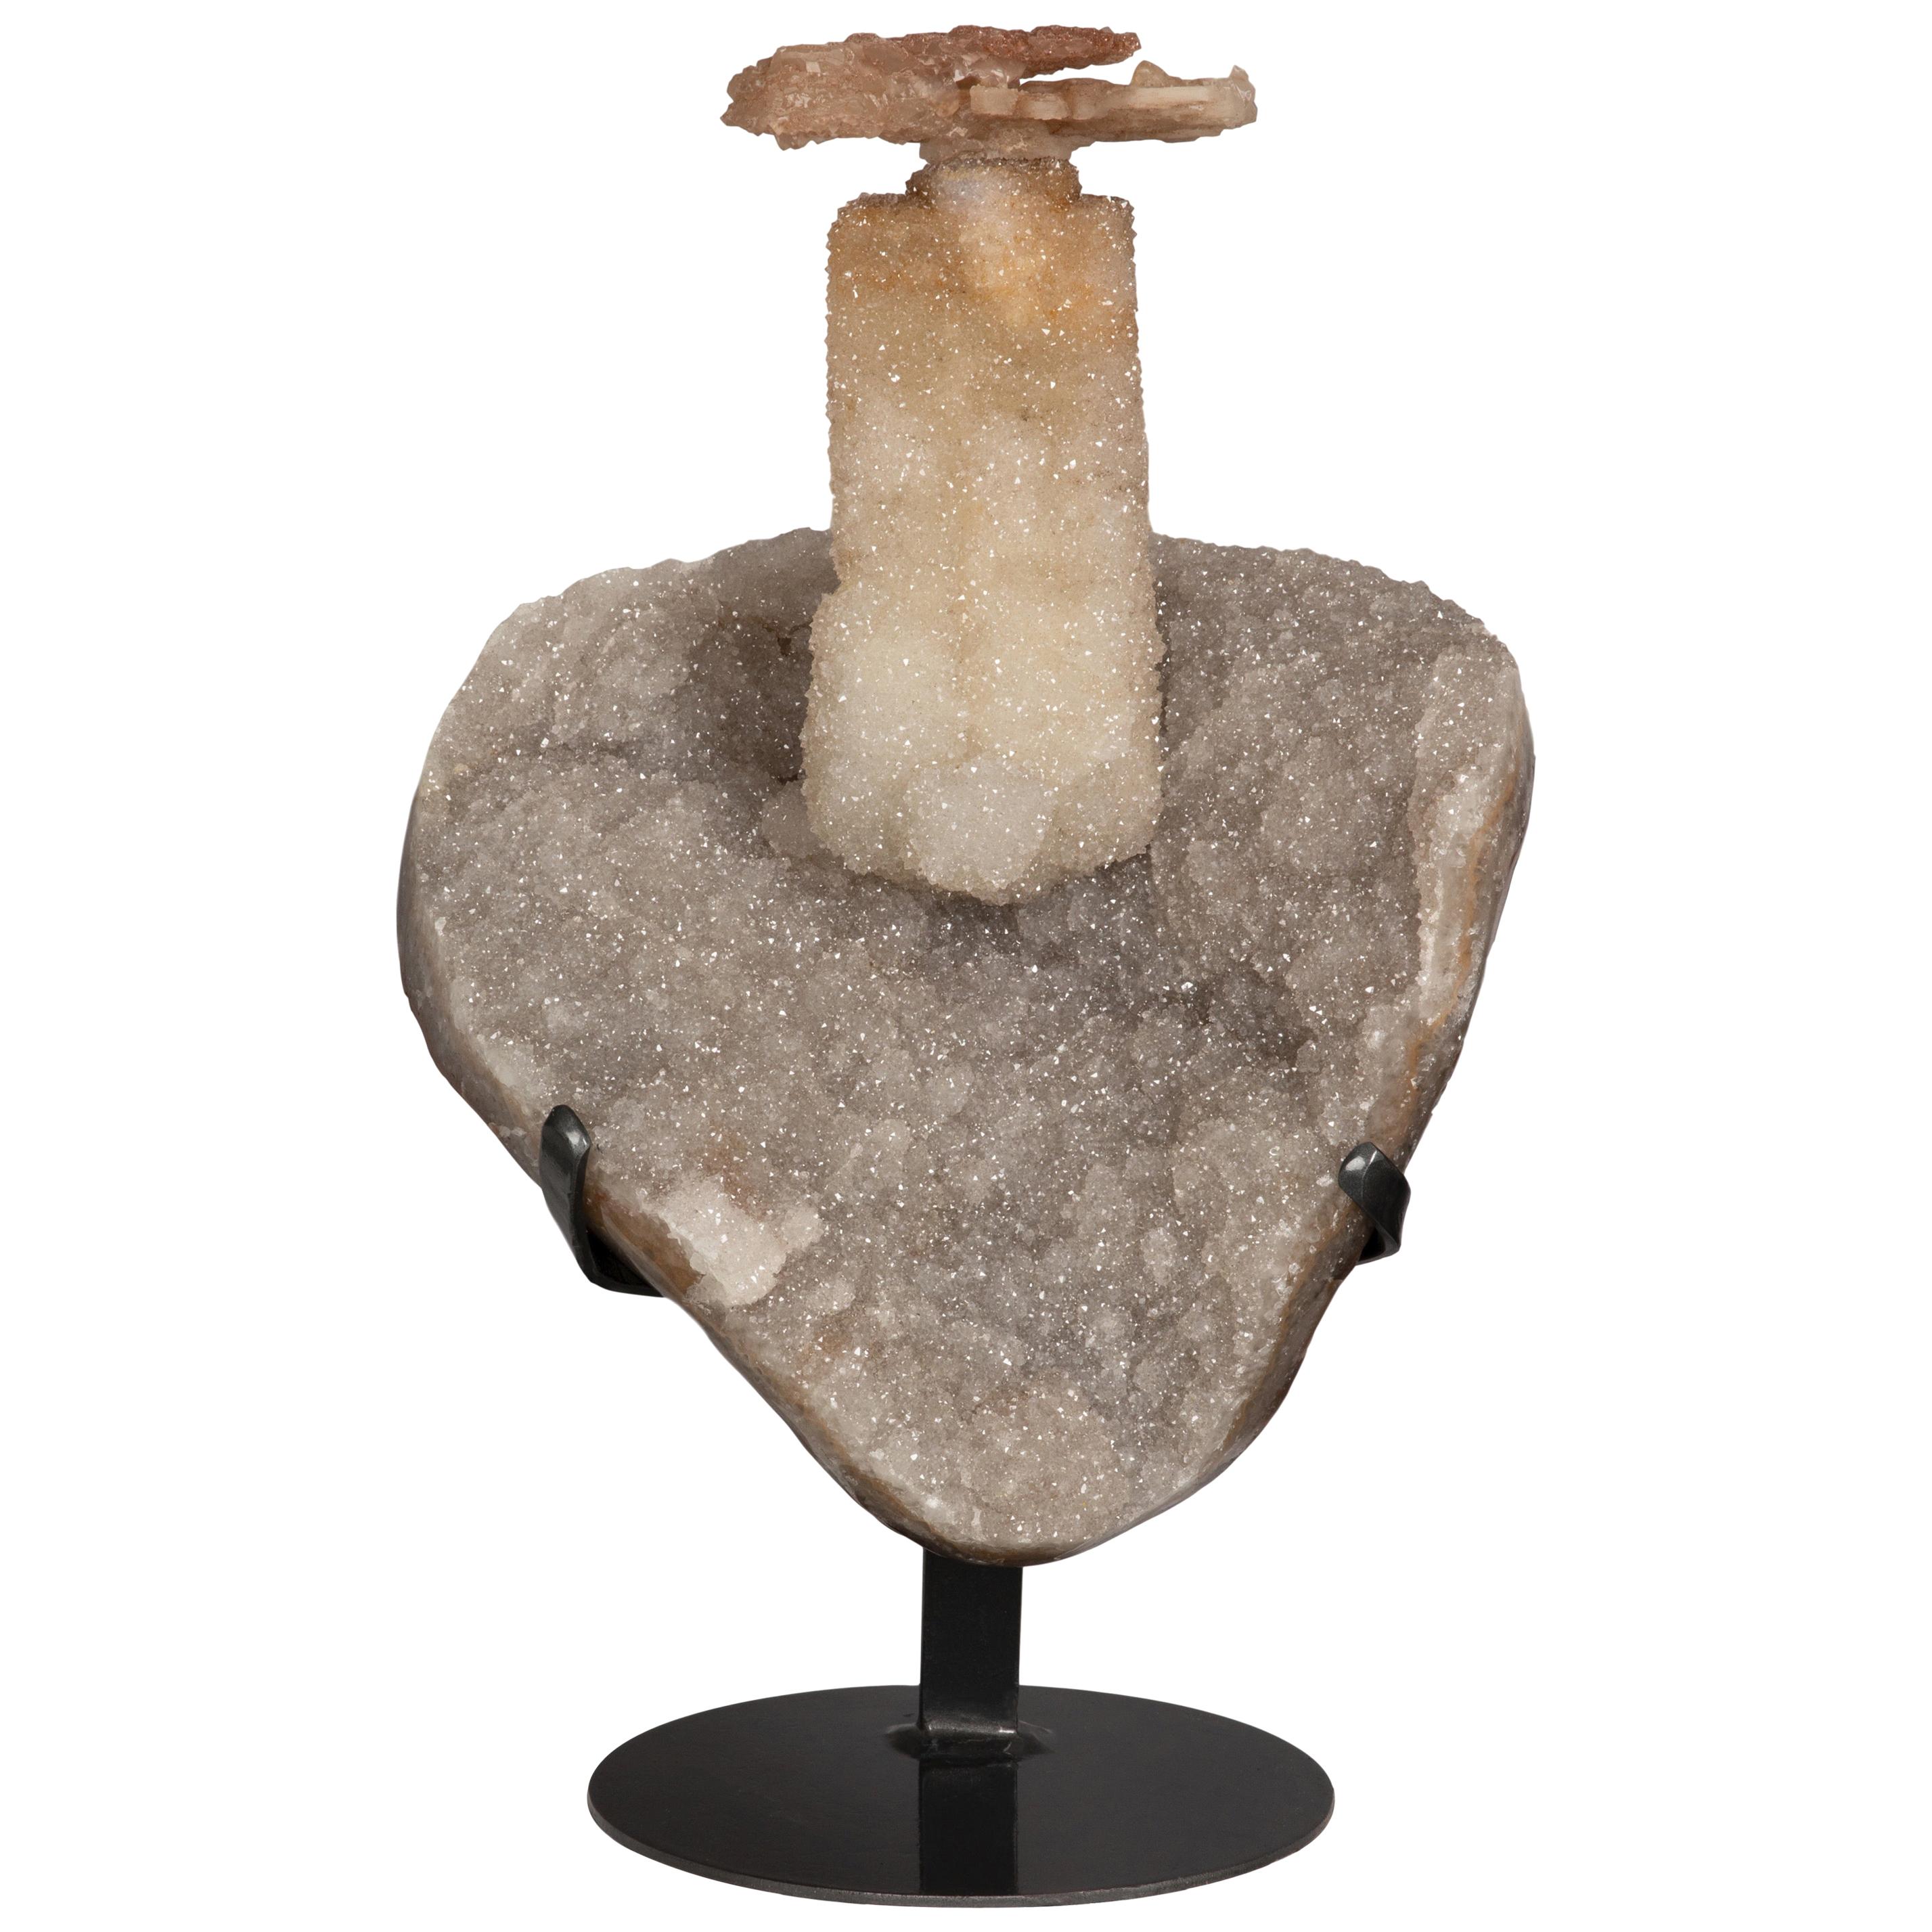 White Quartz “Tree” Sculptural Formation on Metal Stand For Sale